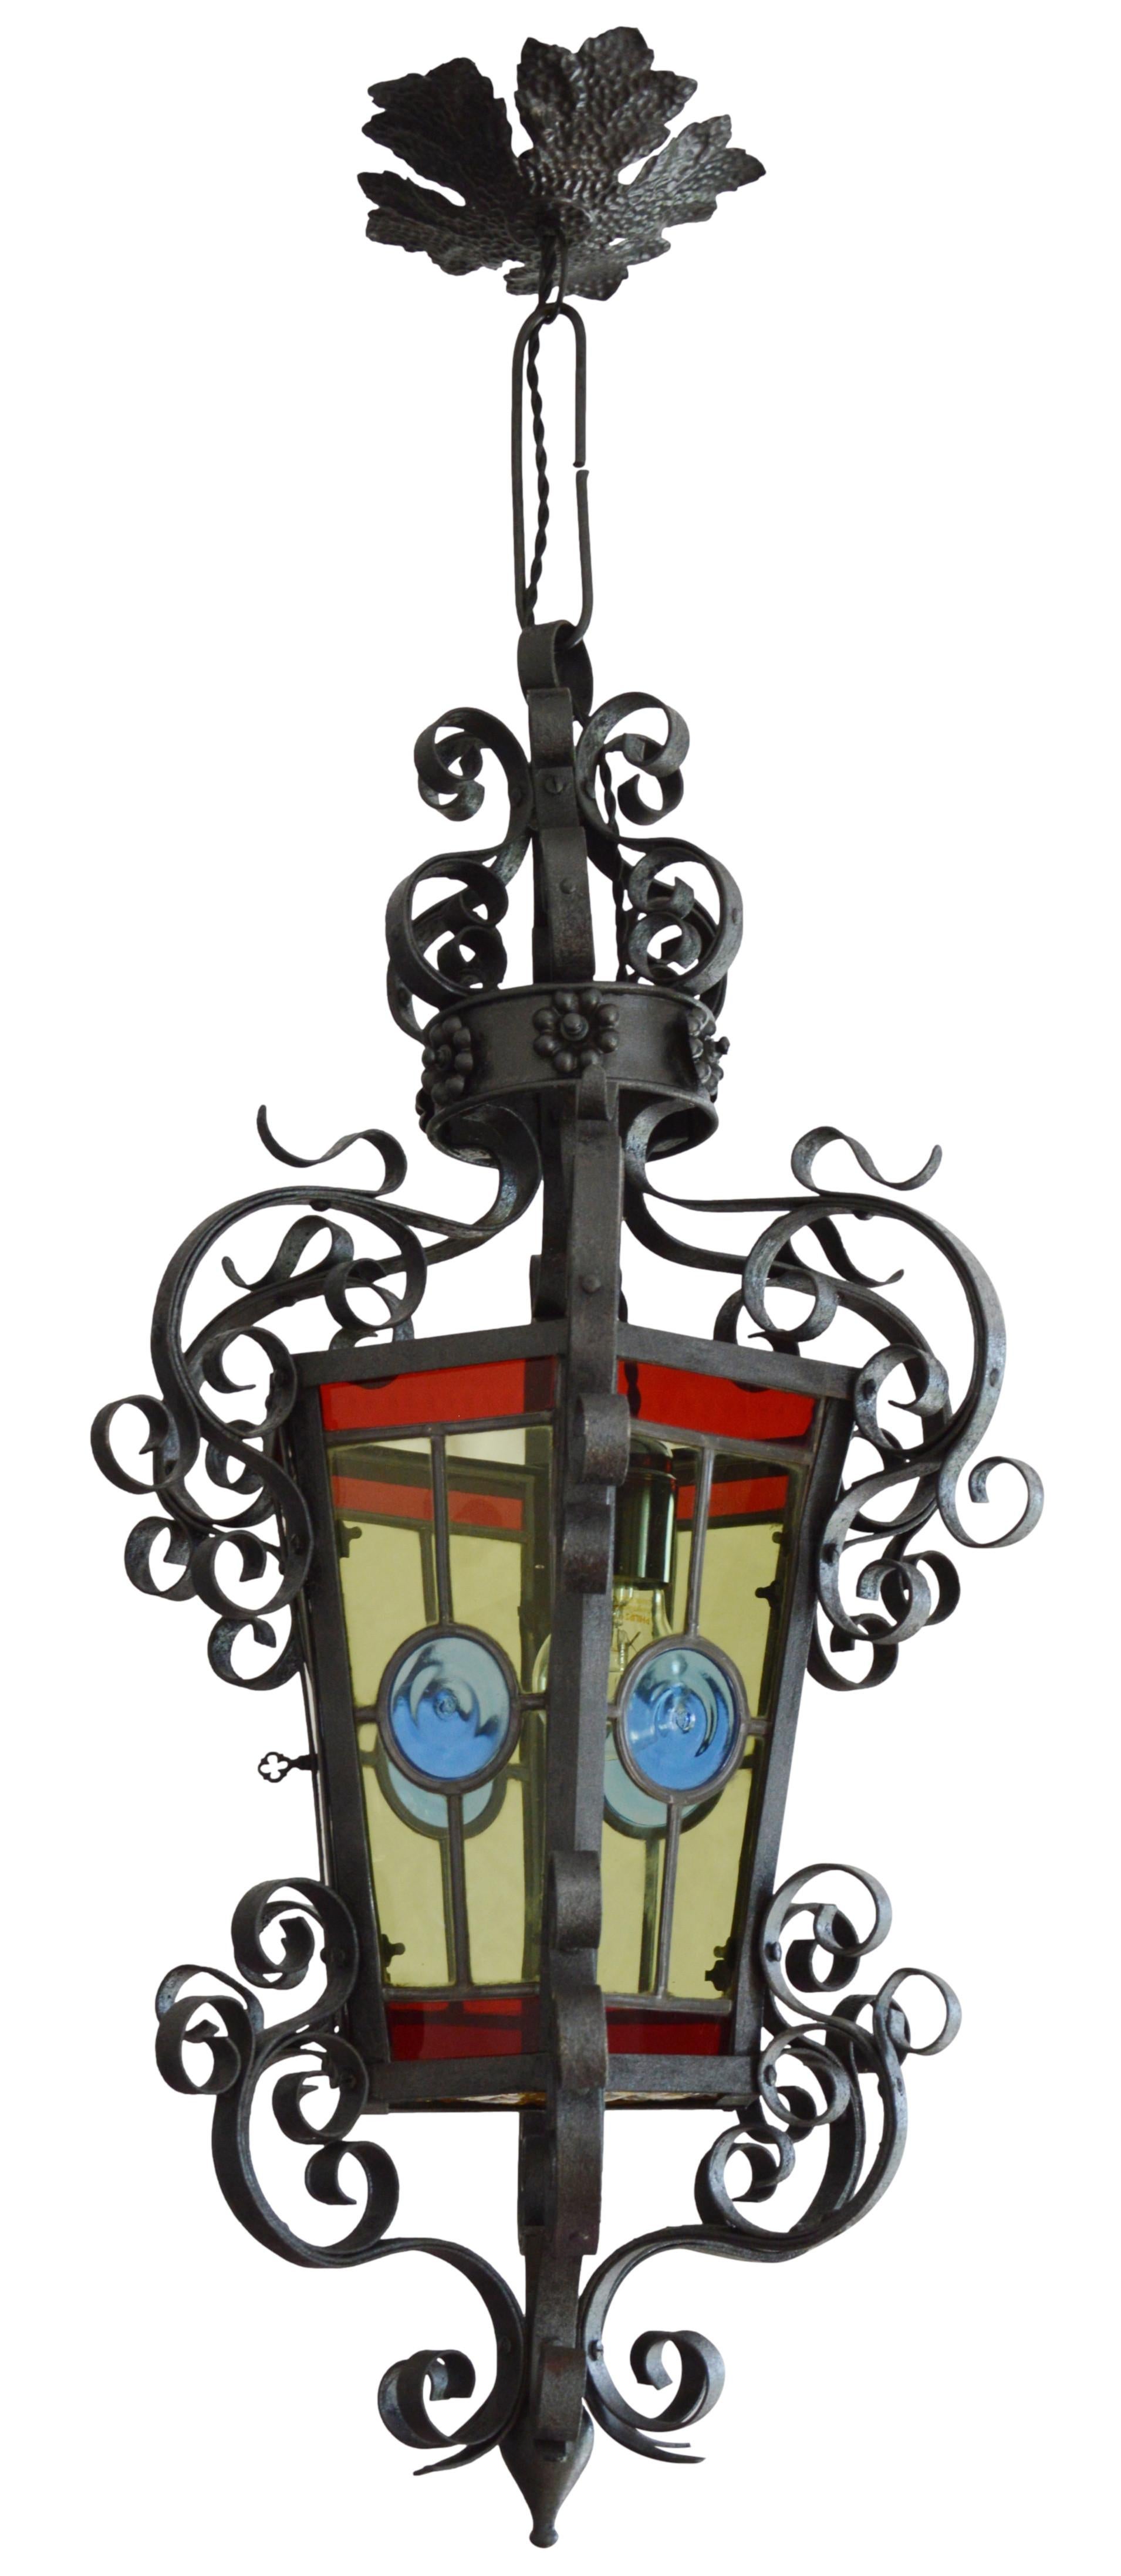 French Art Nouveau stained-glass lantern, France, 1890-1900. Stained-glass and iron. Full height: 35.5